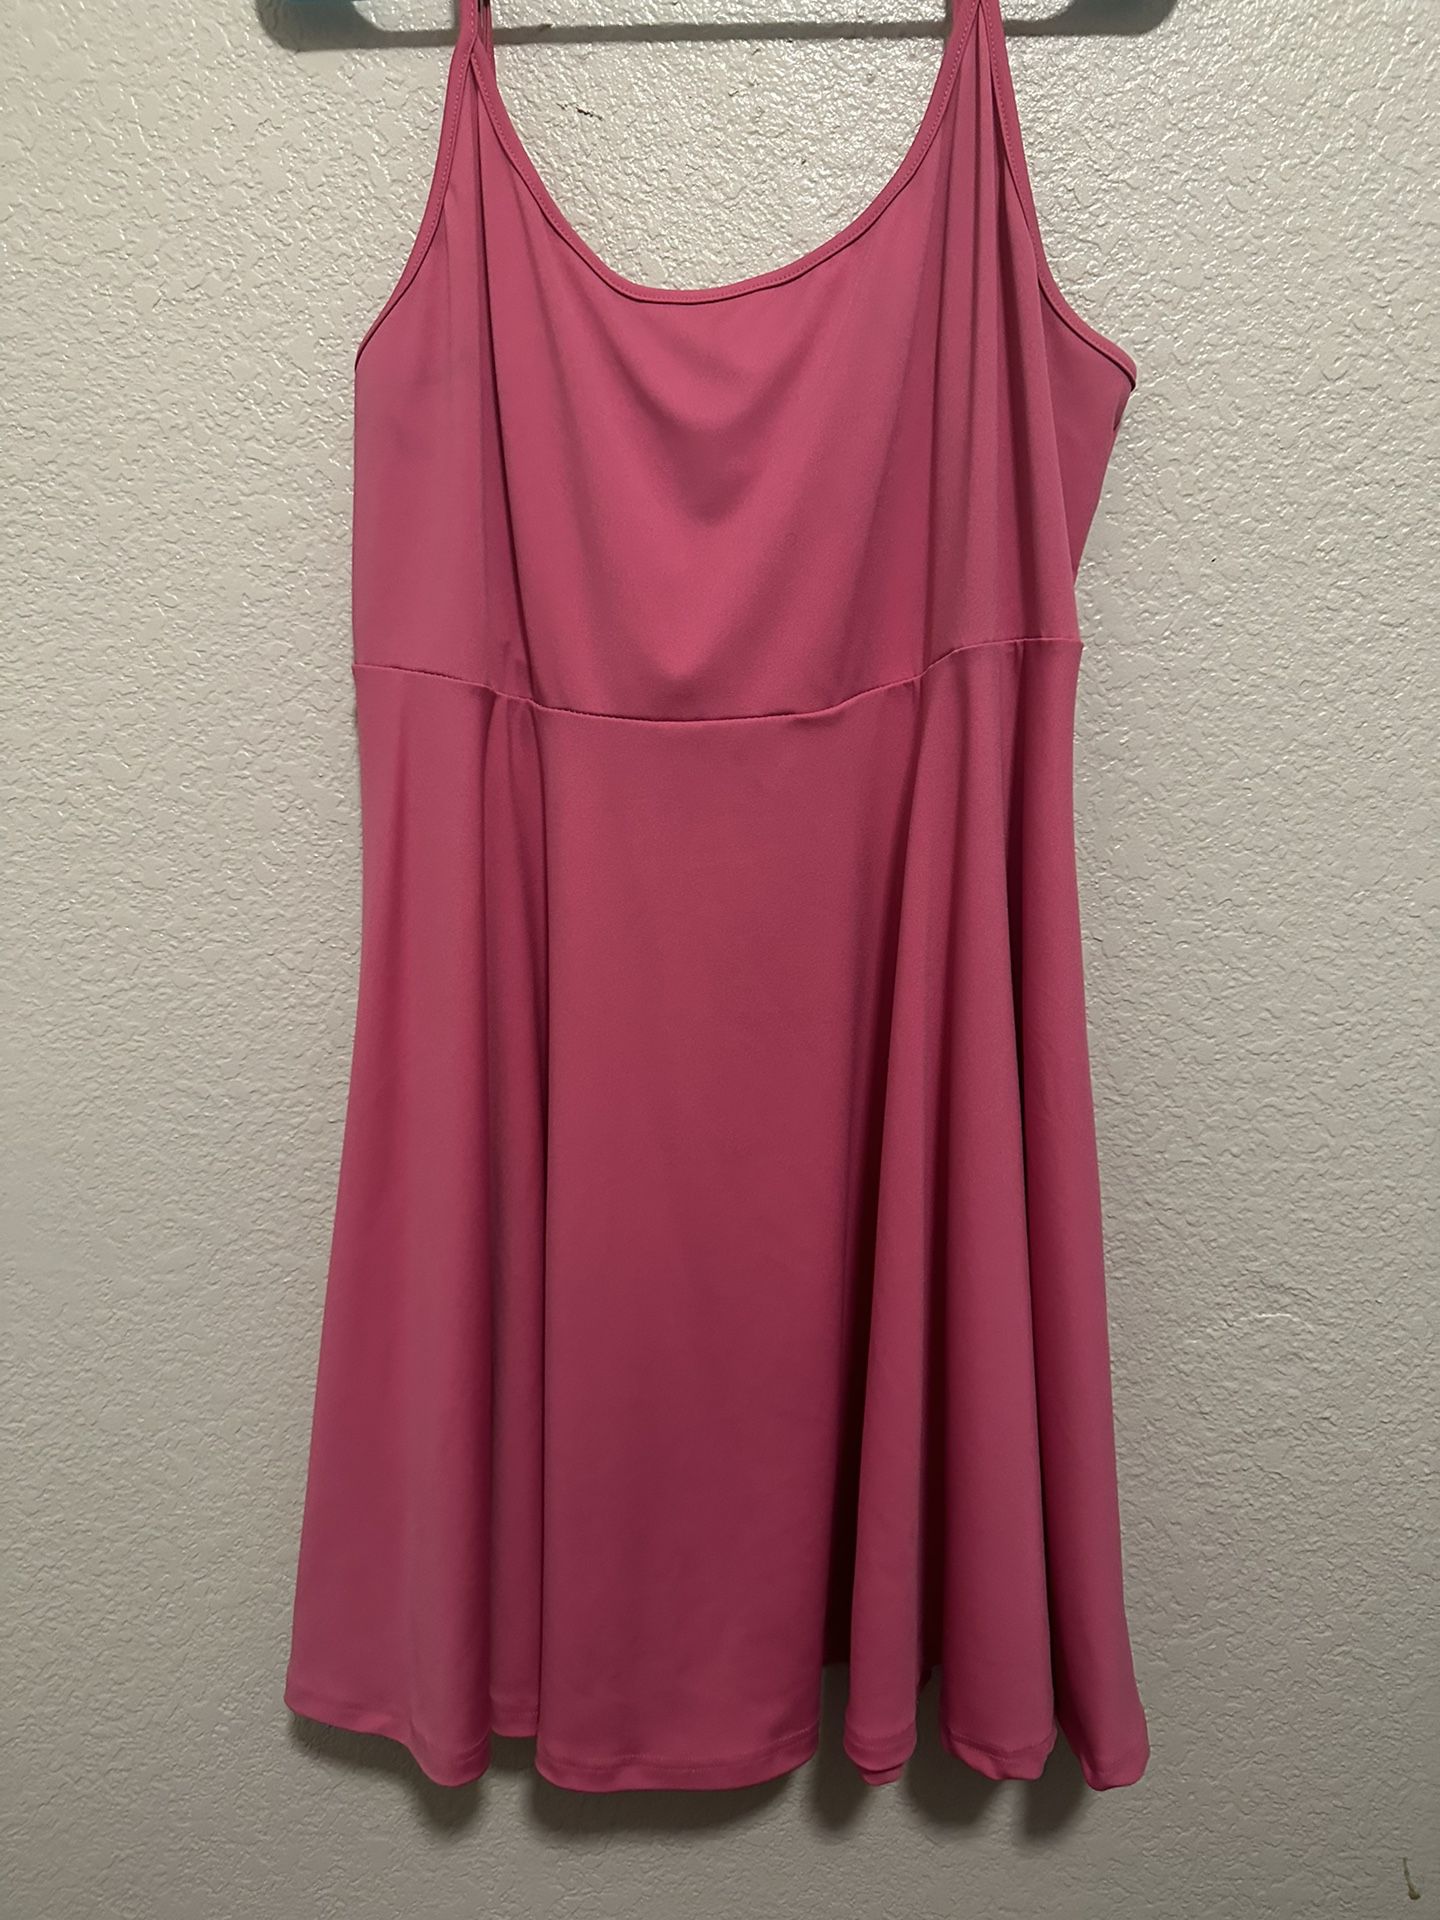 Pink dress from SHEIN 